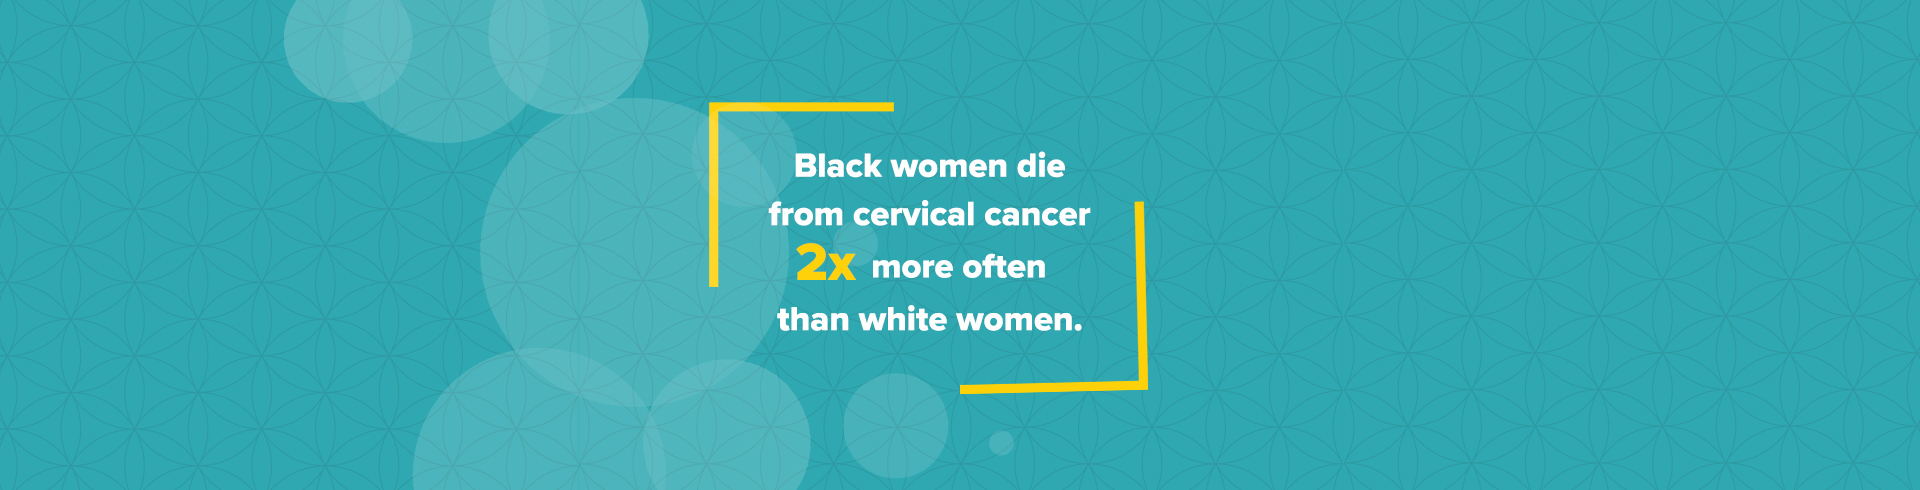 Black women die from cervical cancer 2 times more often than white women